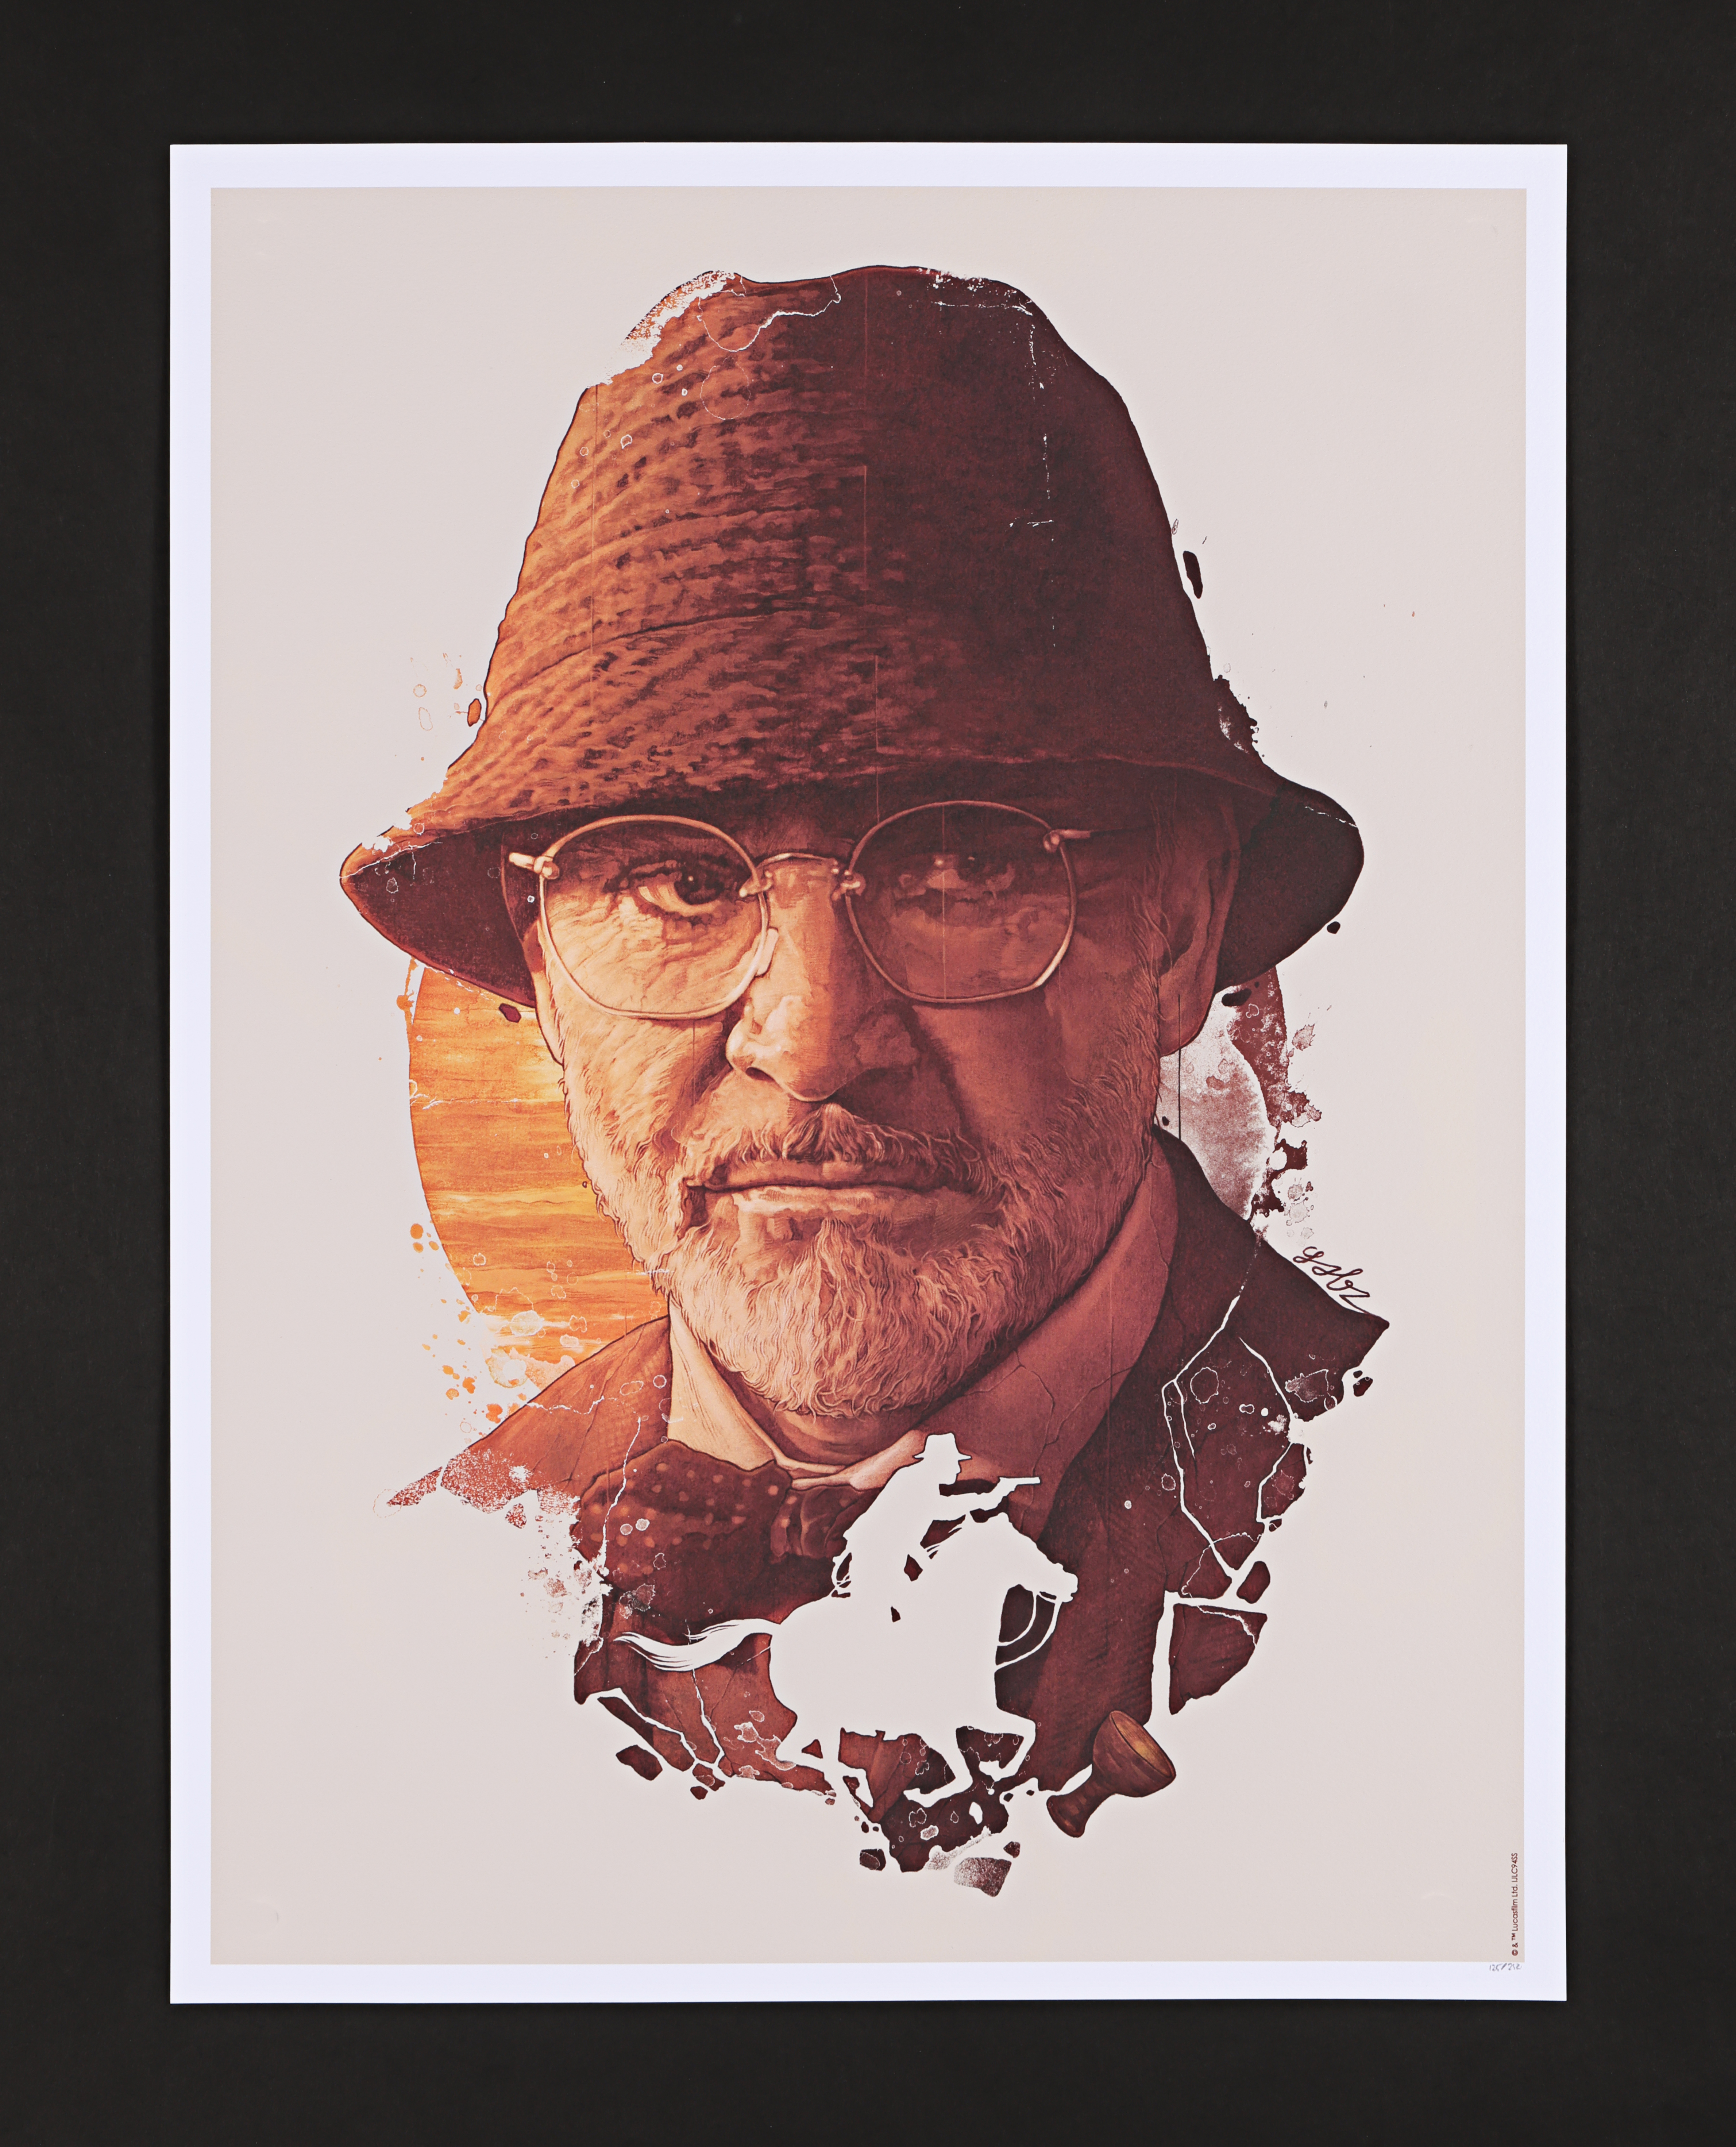 INDIANA JONES: ORIGINAL TRILOGY (1981-1989) - Two Hand-Numbered Limited Edition Prints by Grzegorz " - Image 2 of 2